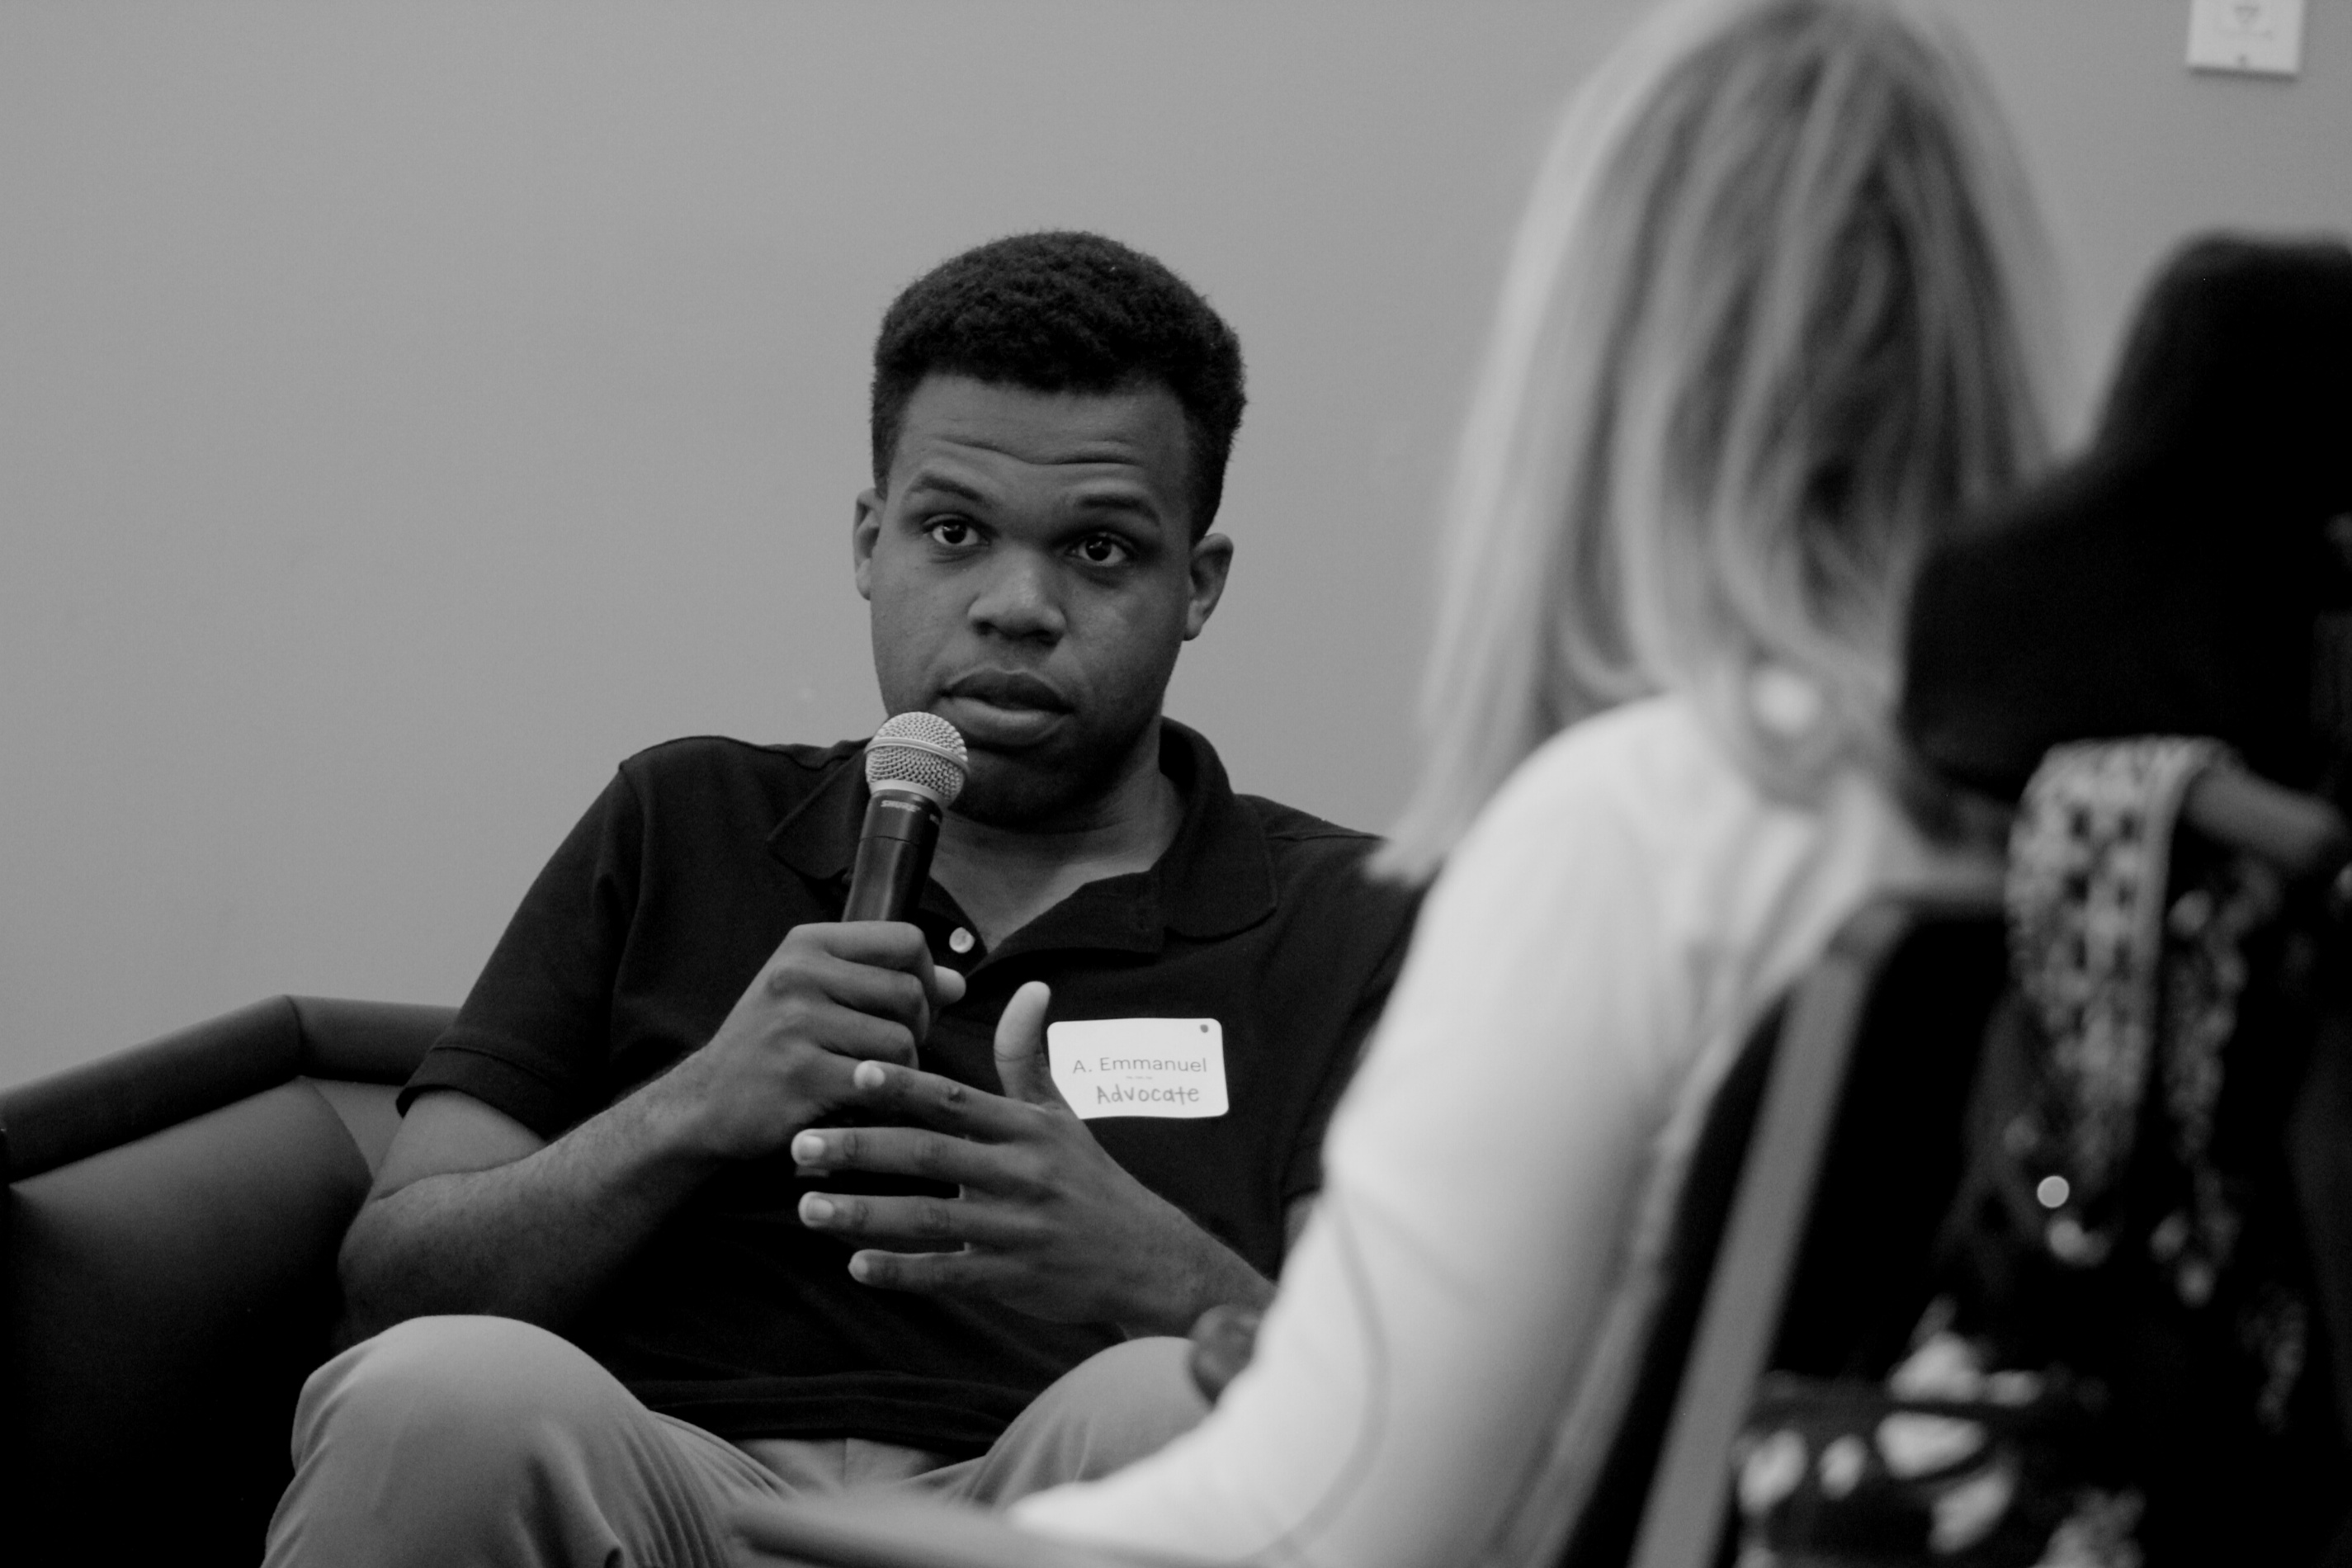 A black autistic man speaking into the microphone during a disability self-advocacy panel at an Illimitable workshop.